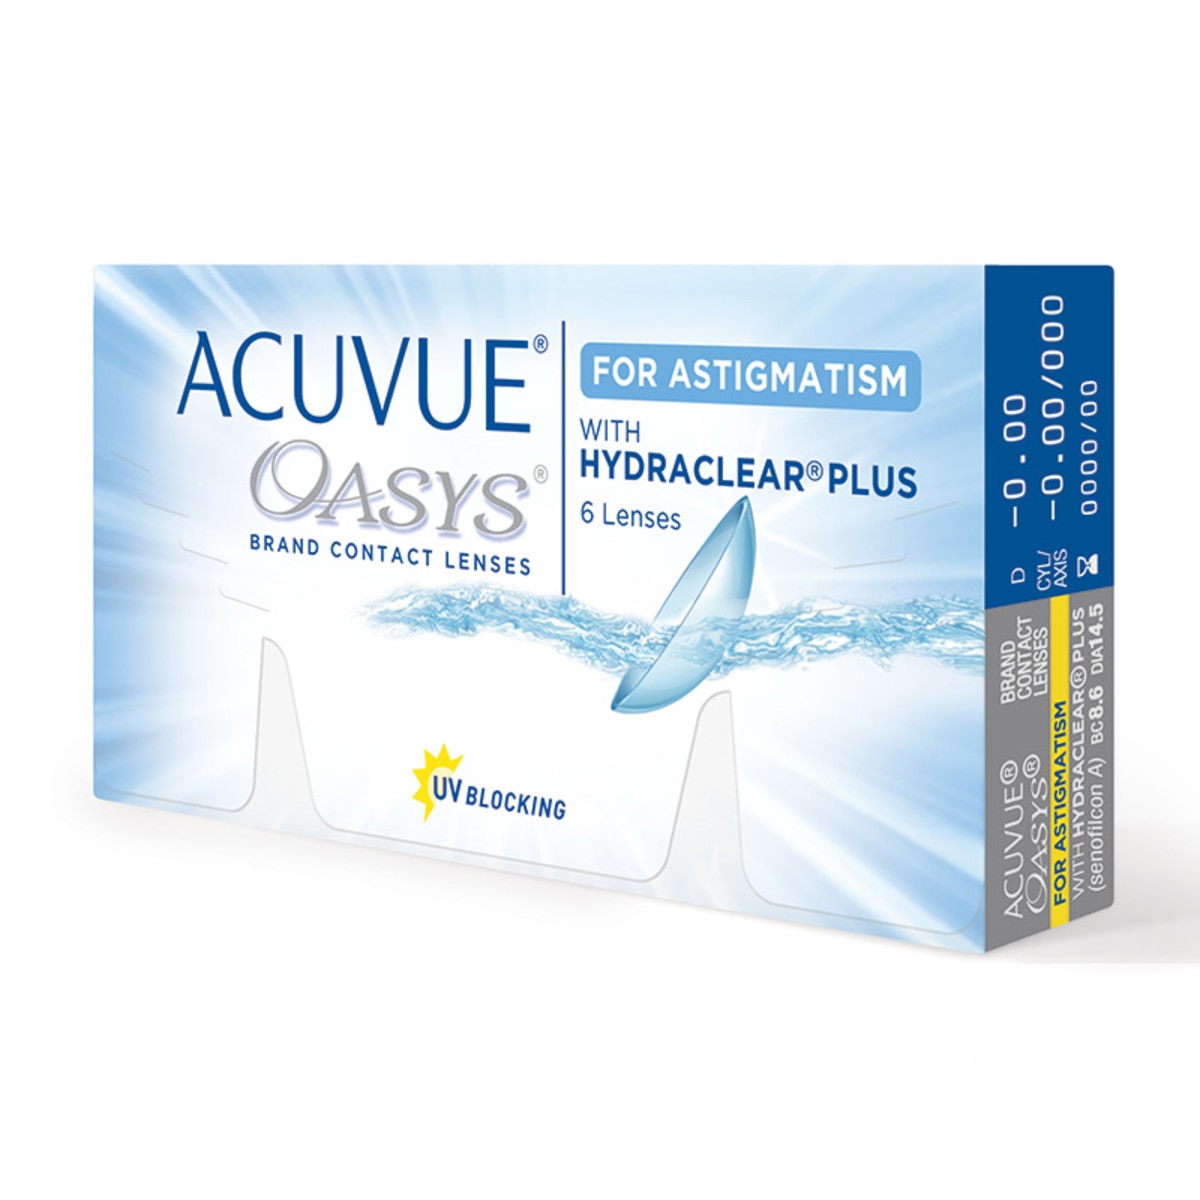 ACUVUE OASYS® con HYDRACLEAR Plus® para Astigmatismo (D -1.5, Cyl/Axis -1.75/100)